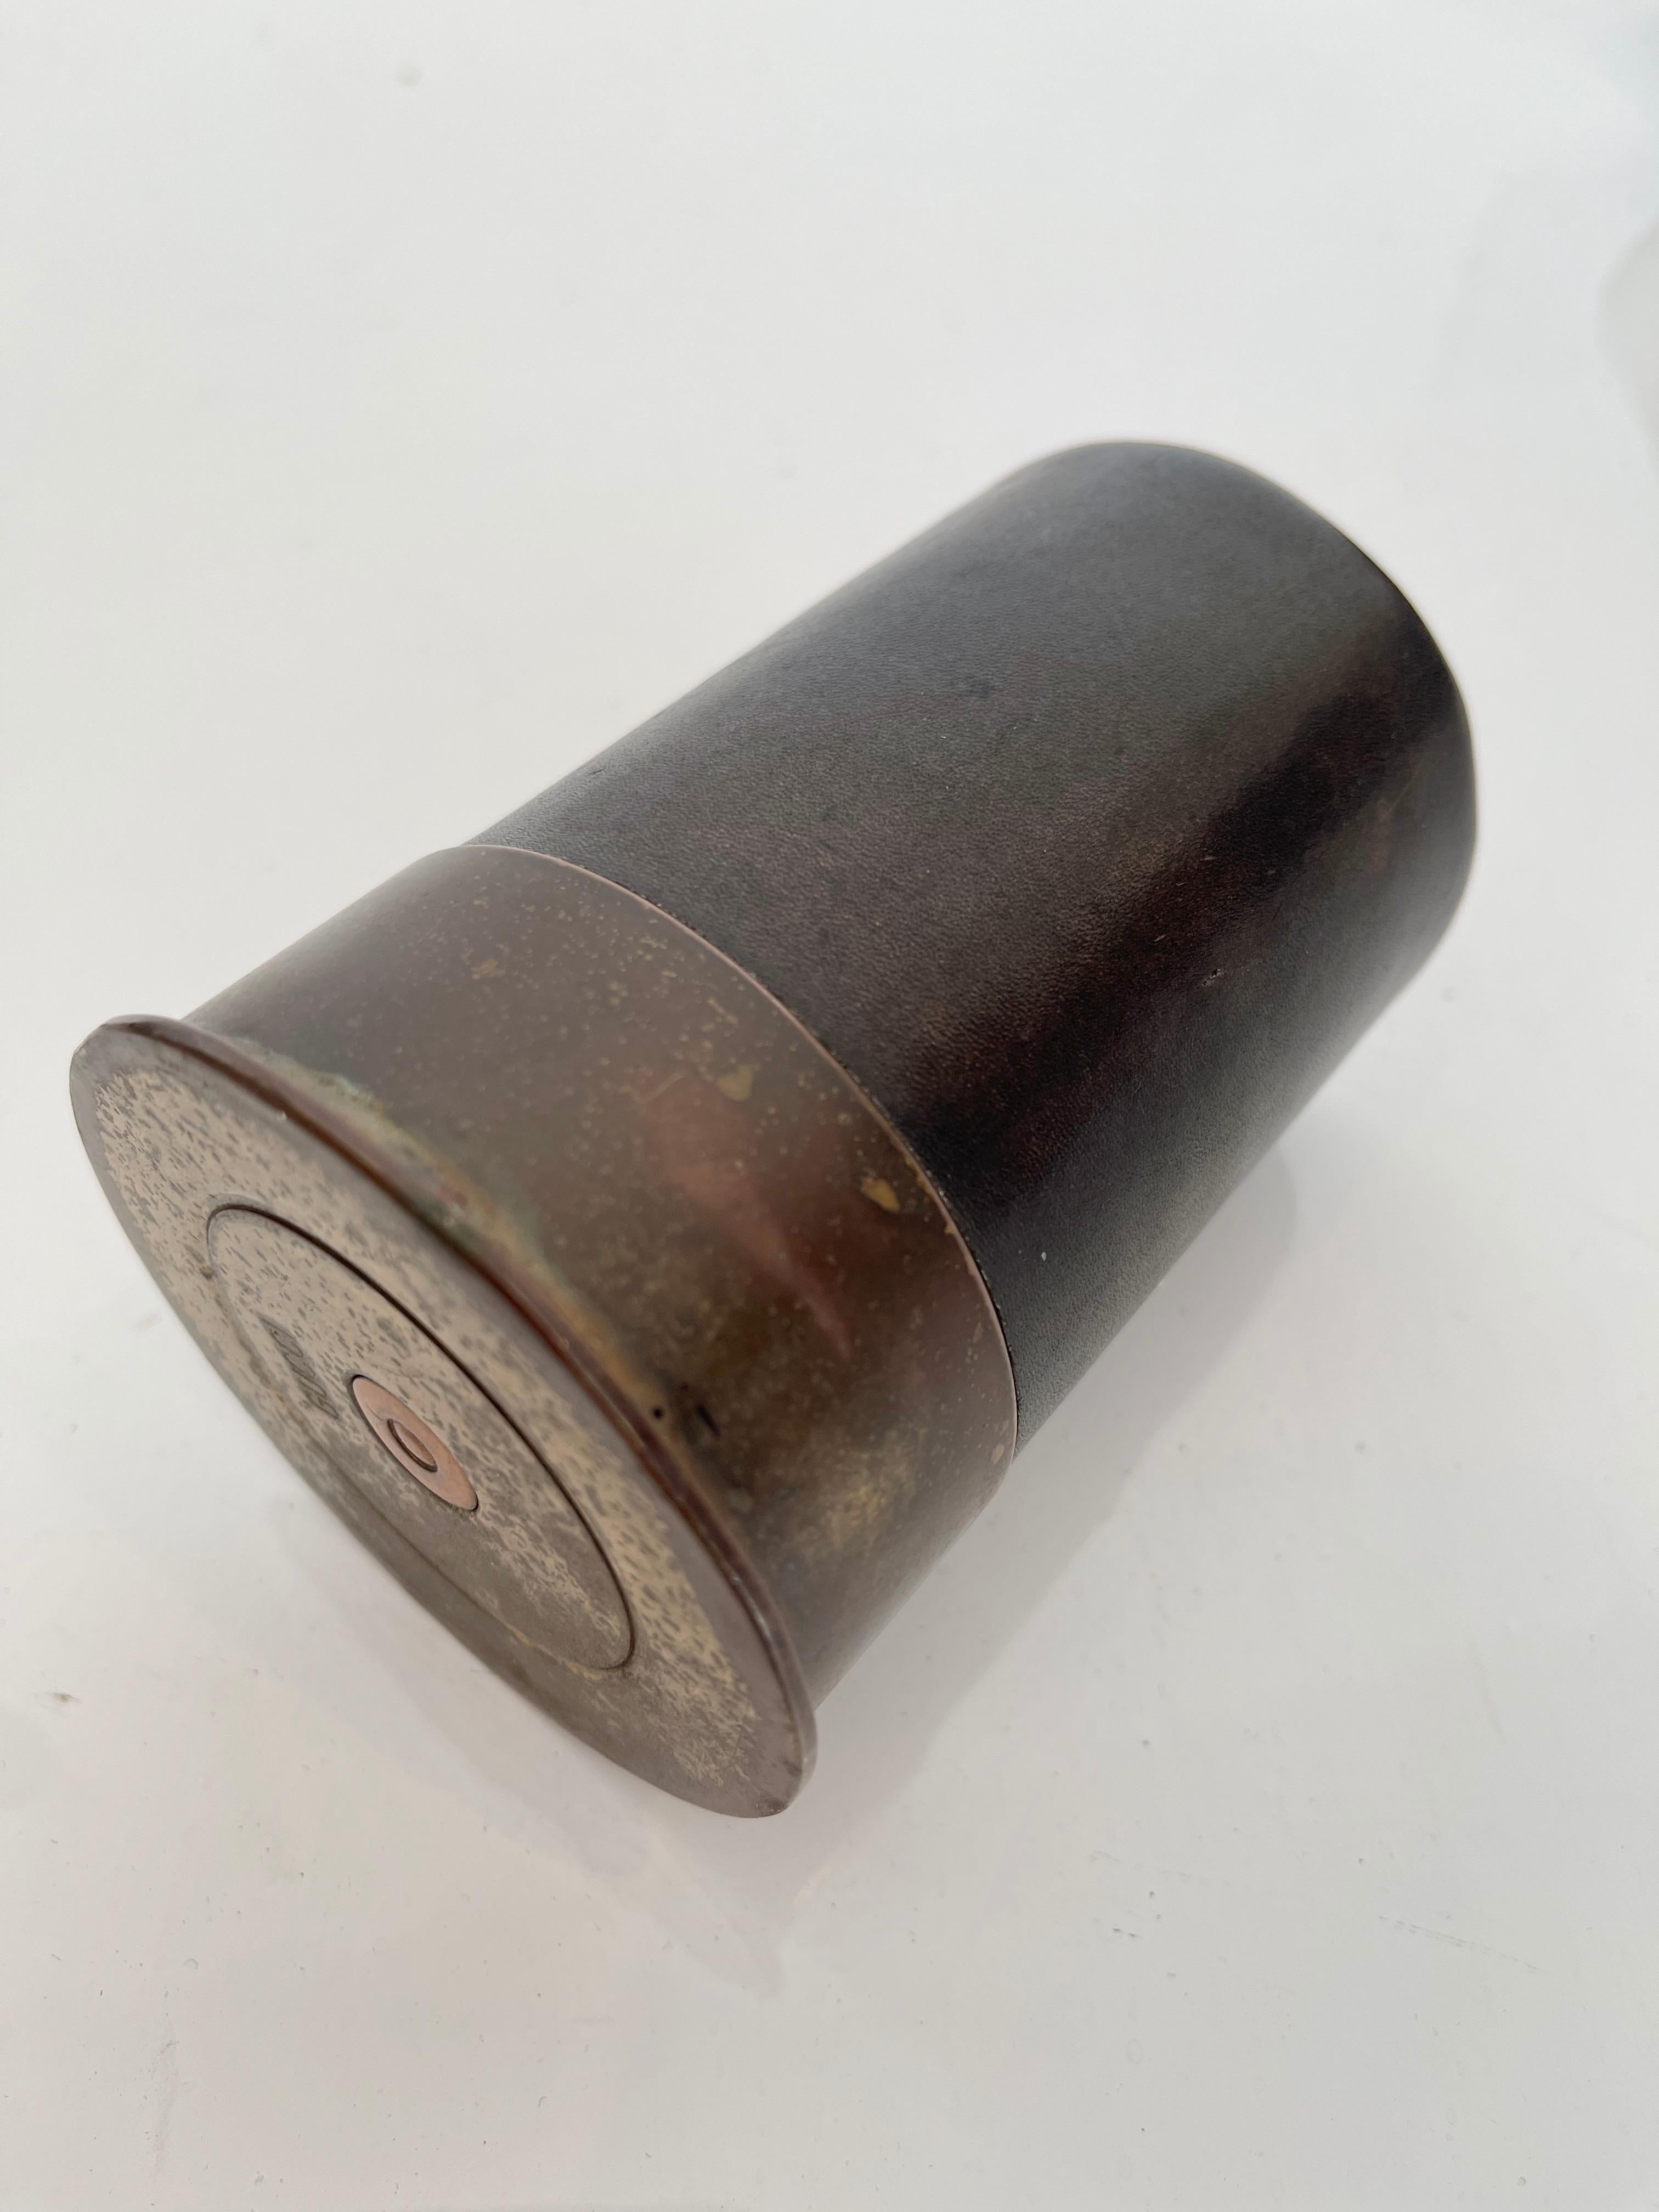 Unusual leather cup with brass bottom made by Gucci. In the shape/style of a shotgun shell. Stamped Gucci on underside of brass. Stamped Gucci on inside of leather cup. Good vintage condition. Great desktop item with functionality and fun design.